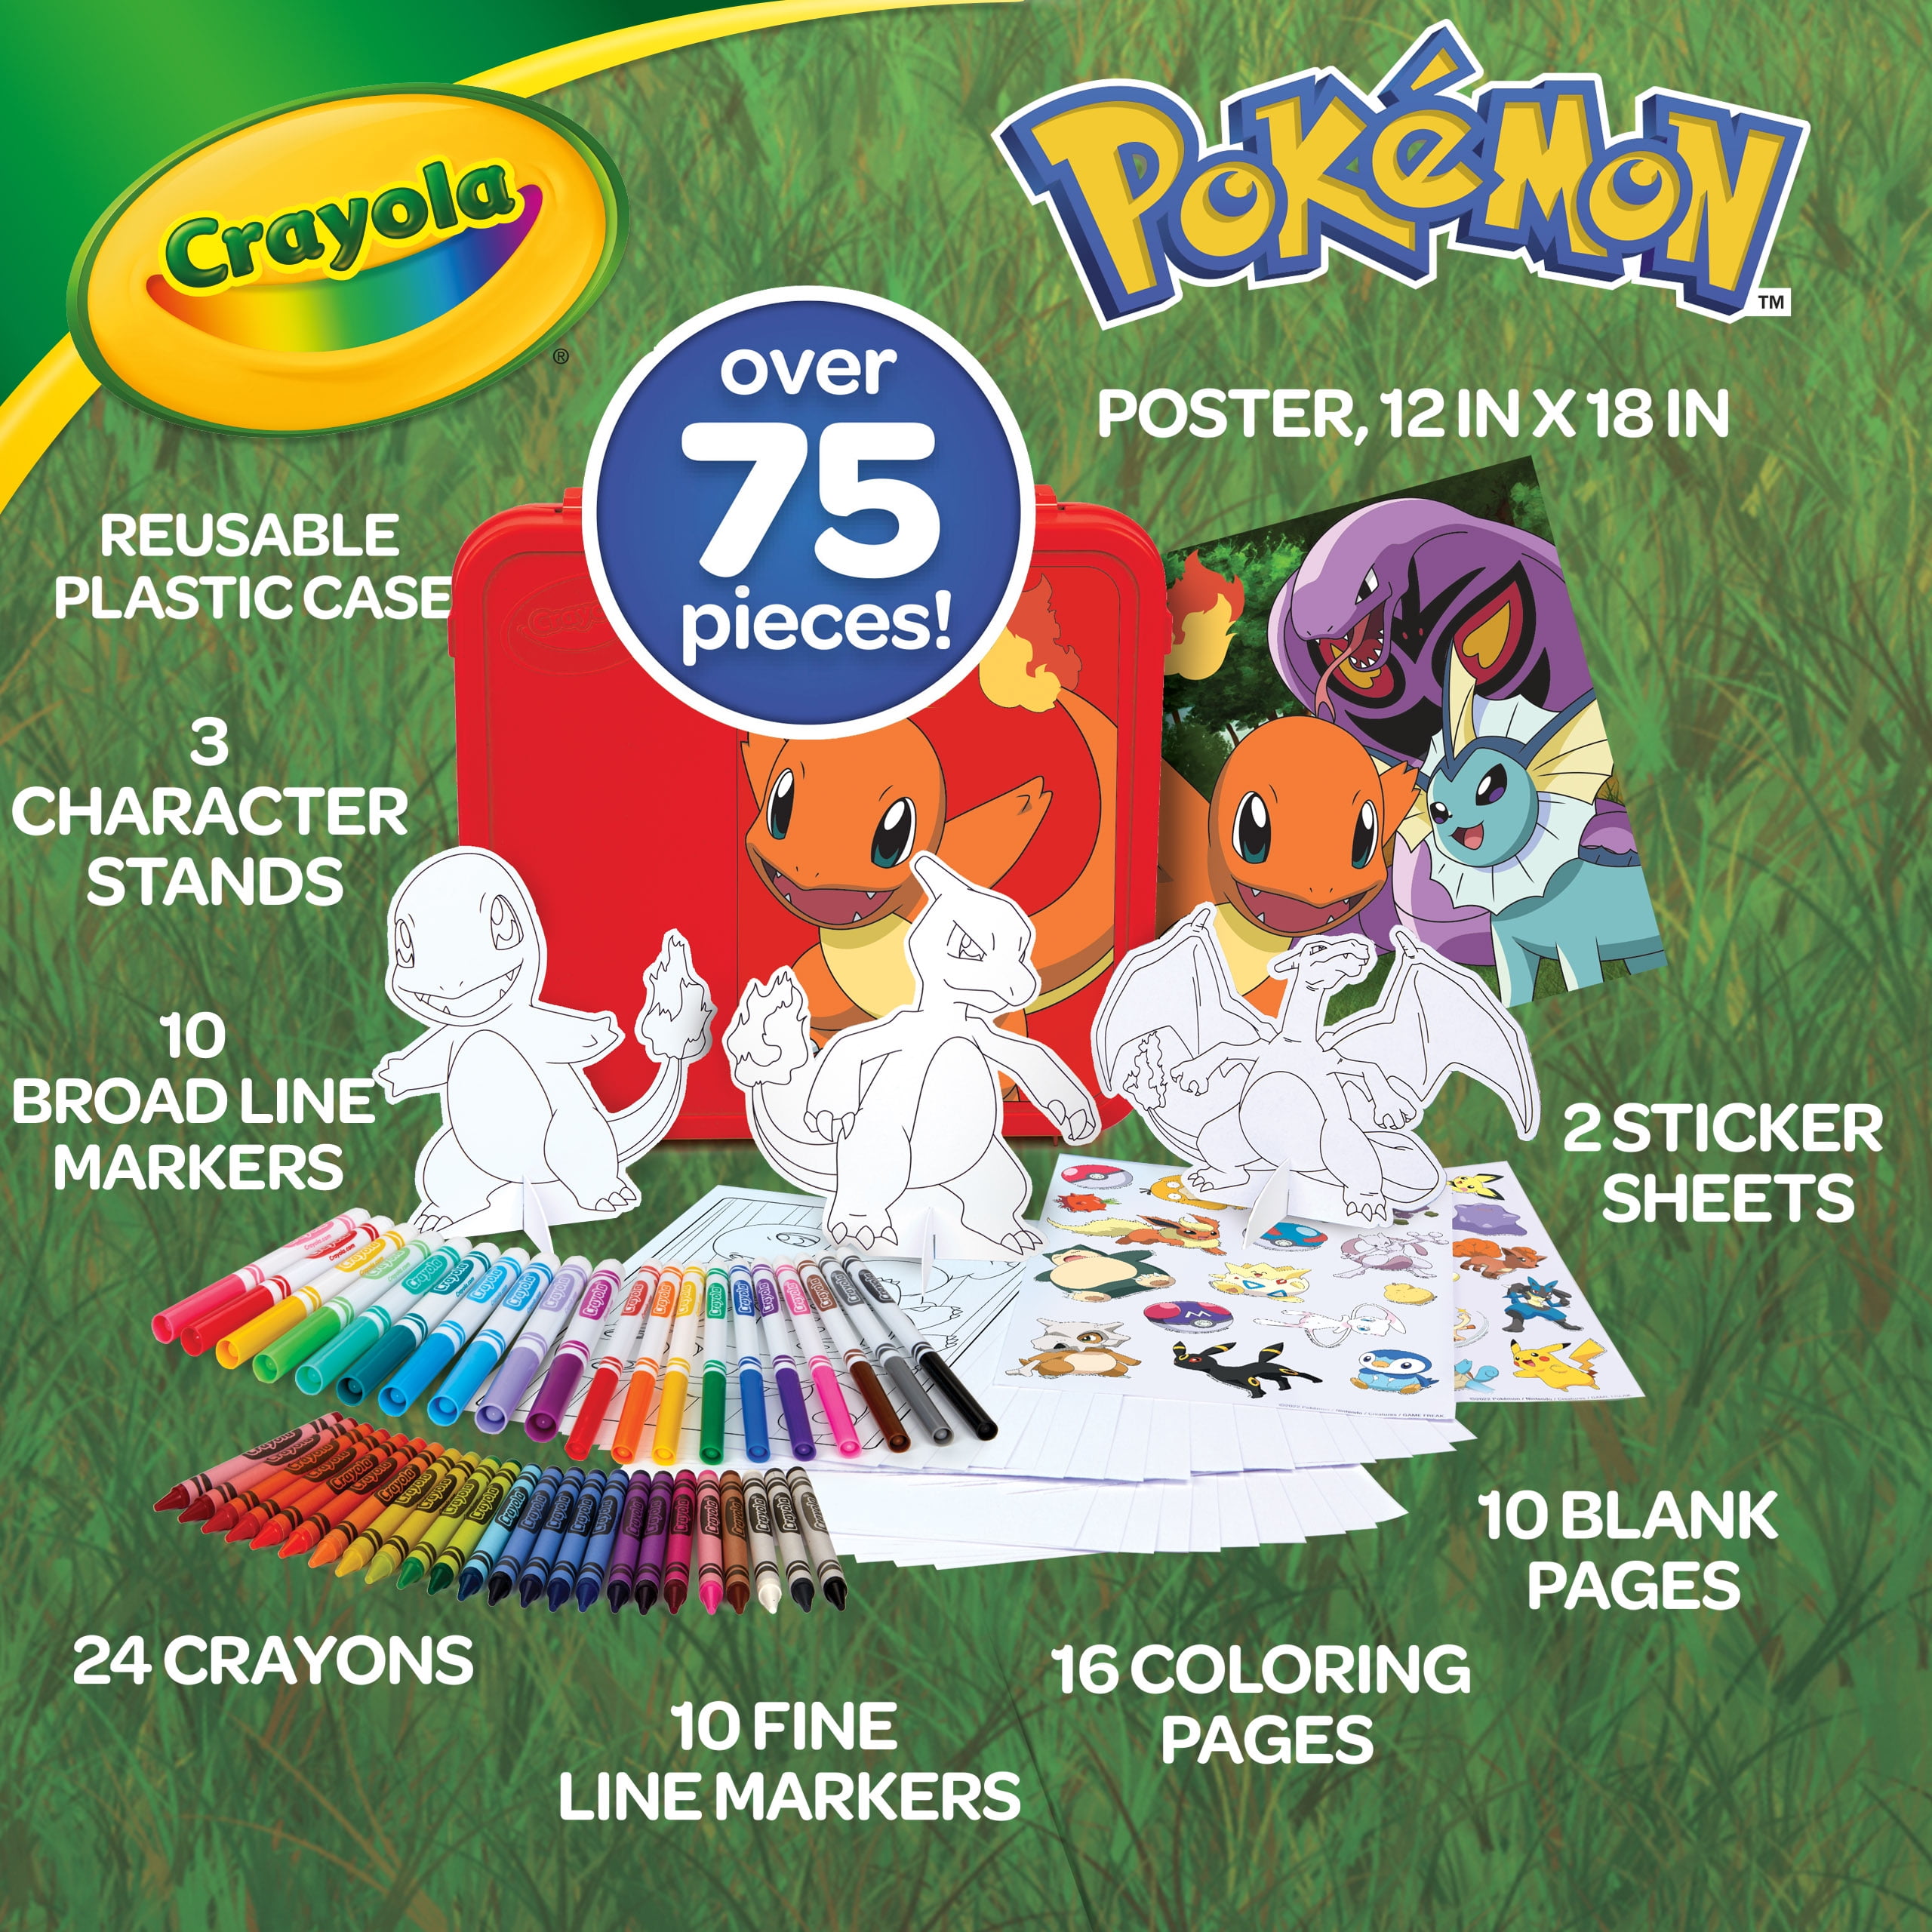 Pokemon Kids Coloring Art Set with Pencil Case Markers Crayons and